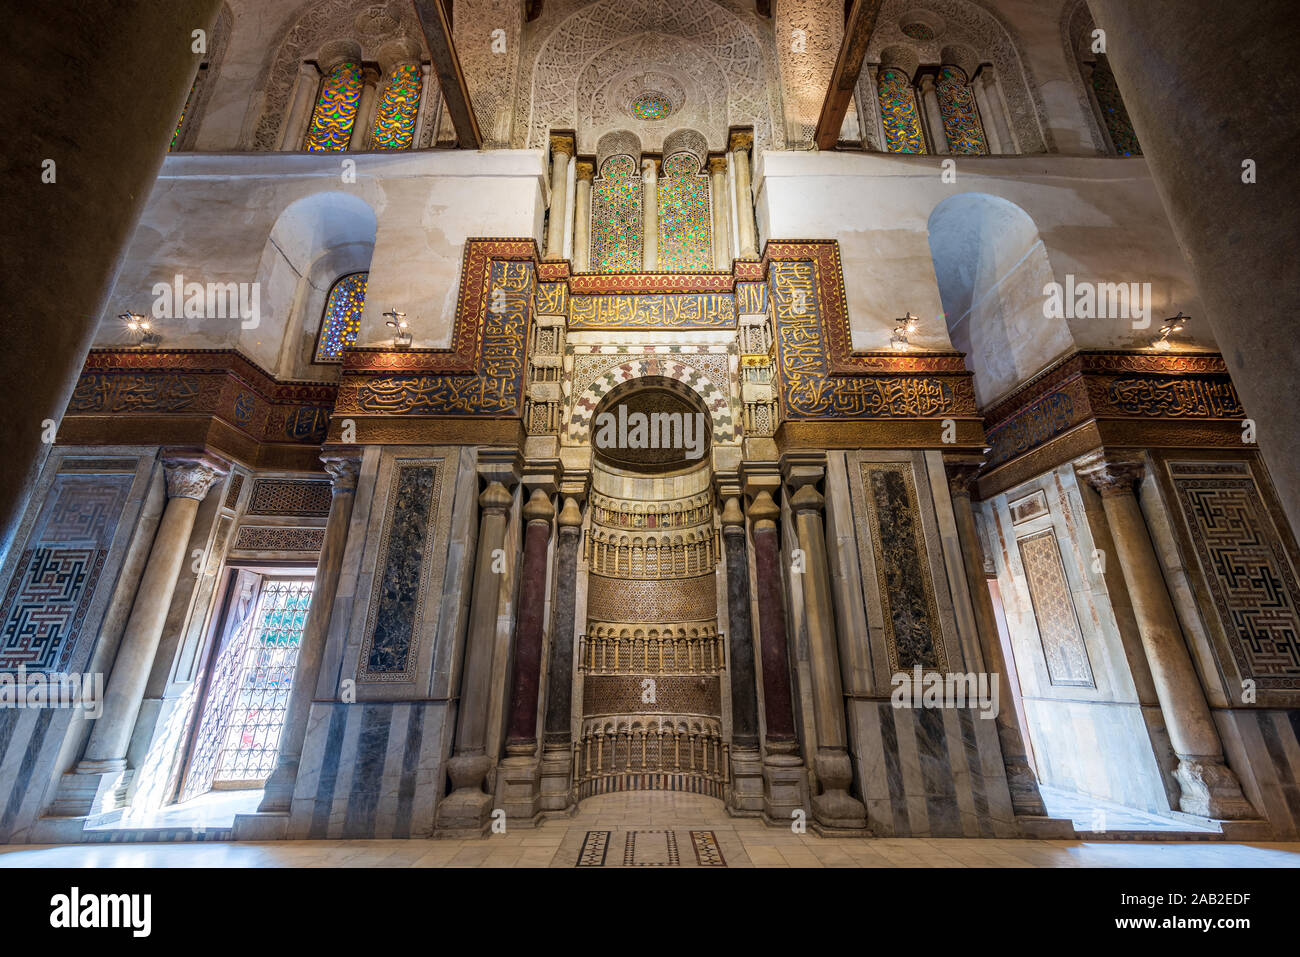 Mausoleum of Sultan Qalawun with decorated colorful marble niche - Mihrab - embedded in decorated marble wall, and colorful stain glass windows, Moez Street, Gamalia District, Medieval Cairo, Egypt Stock Photo